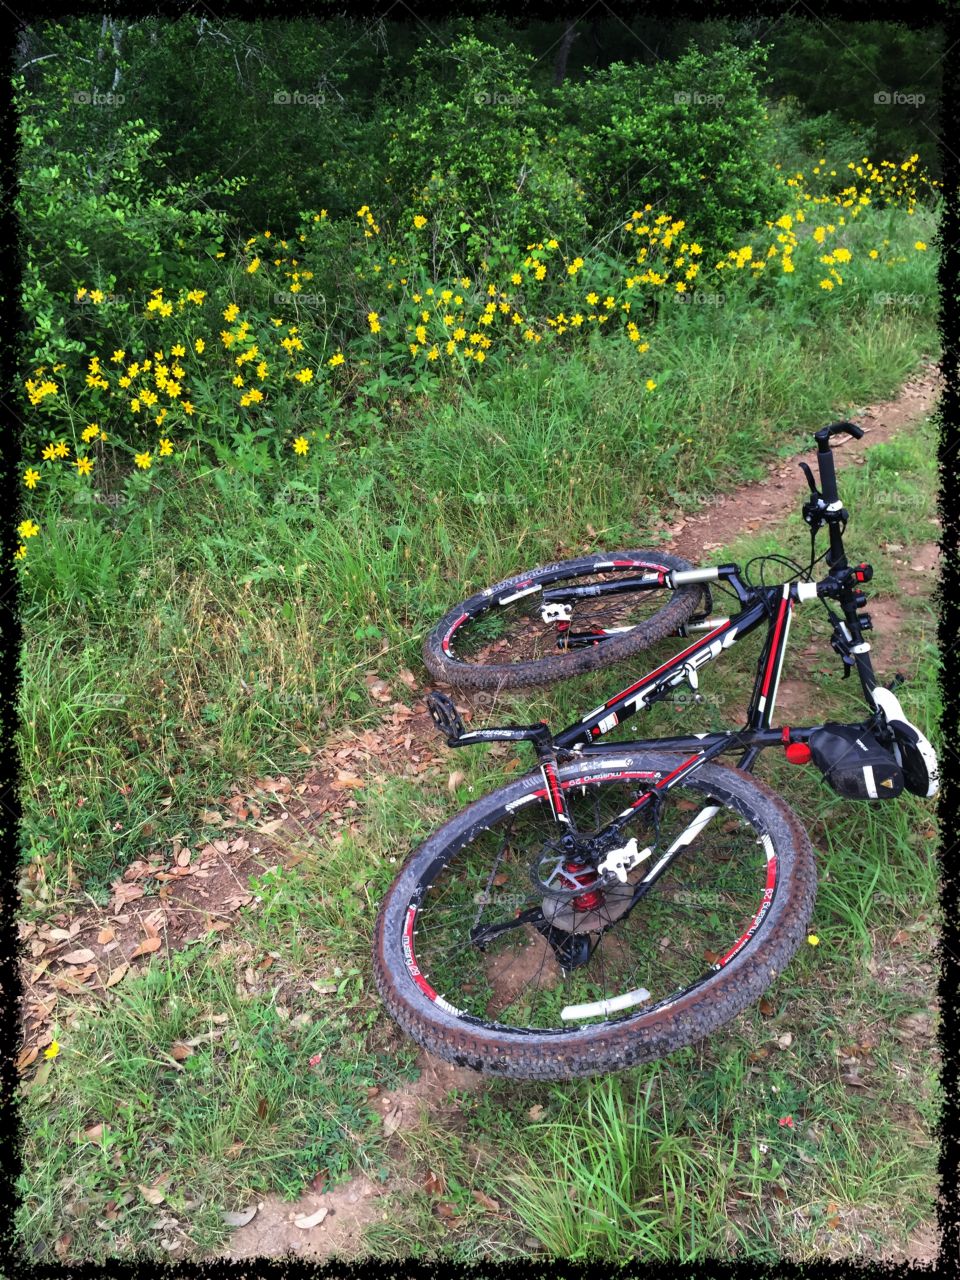 On the train - Mountain biking in the Texas Hill Country 